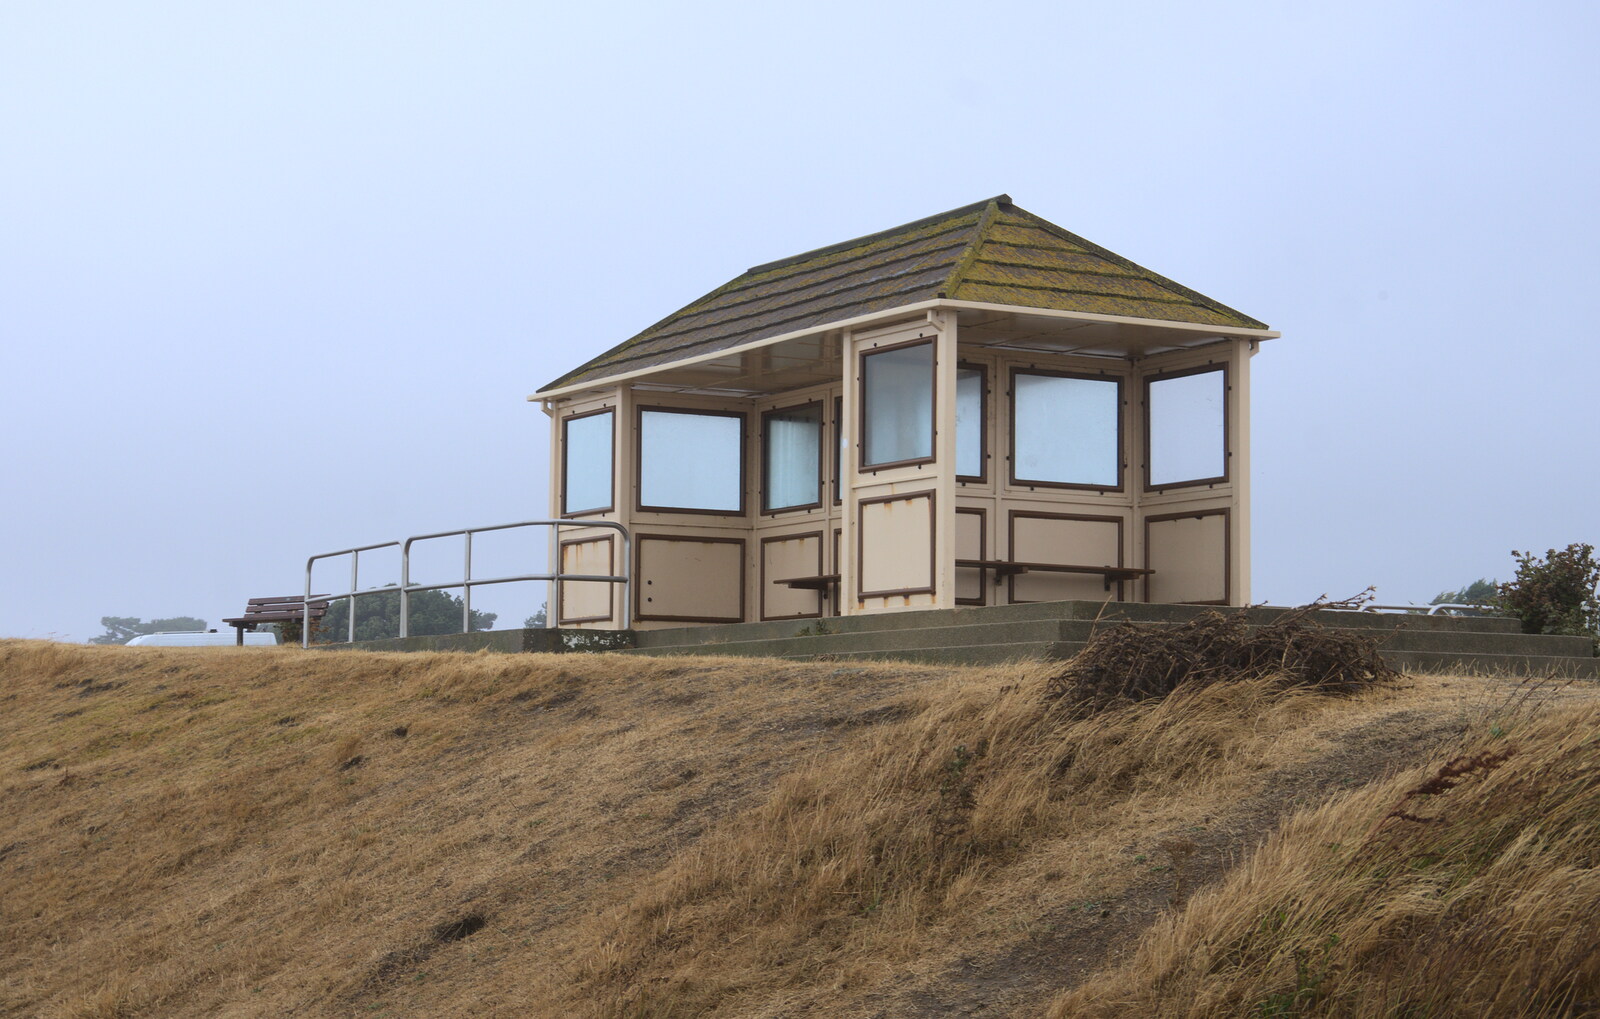 A folorn shelter on the cliff top from Blustery Beach Trips, Walkford and Highcliffe, Dorset - 29th July 2018